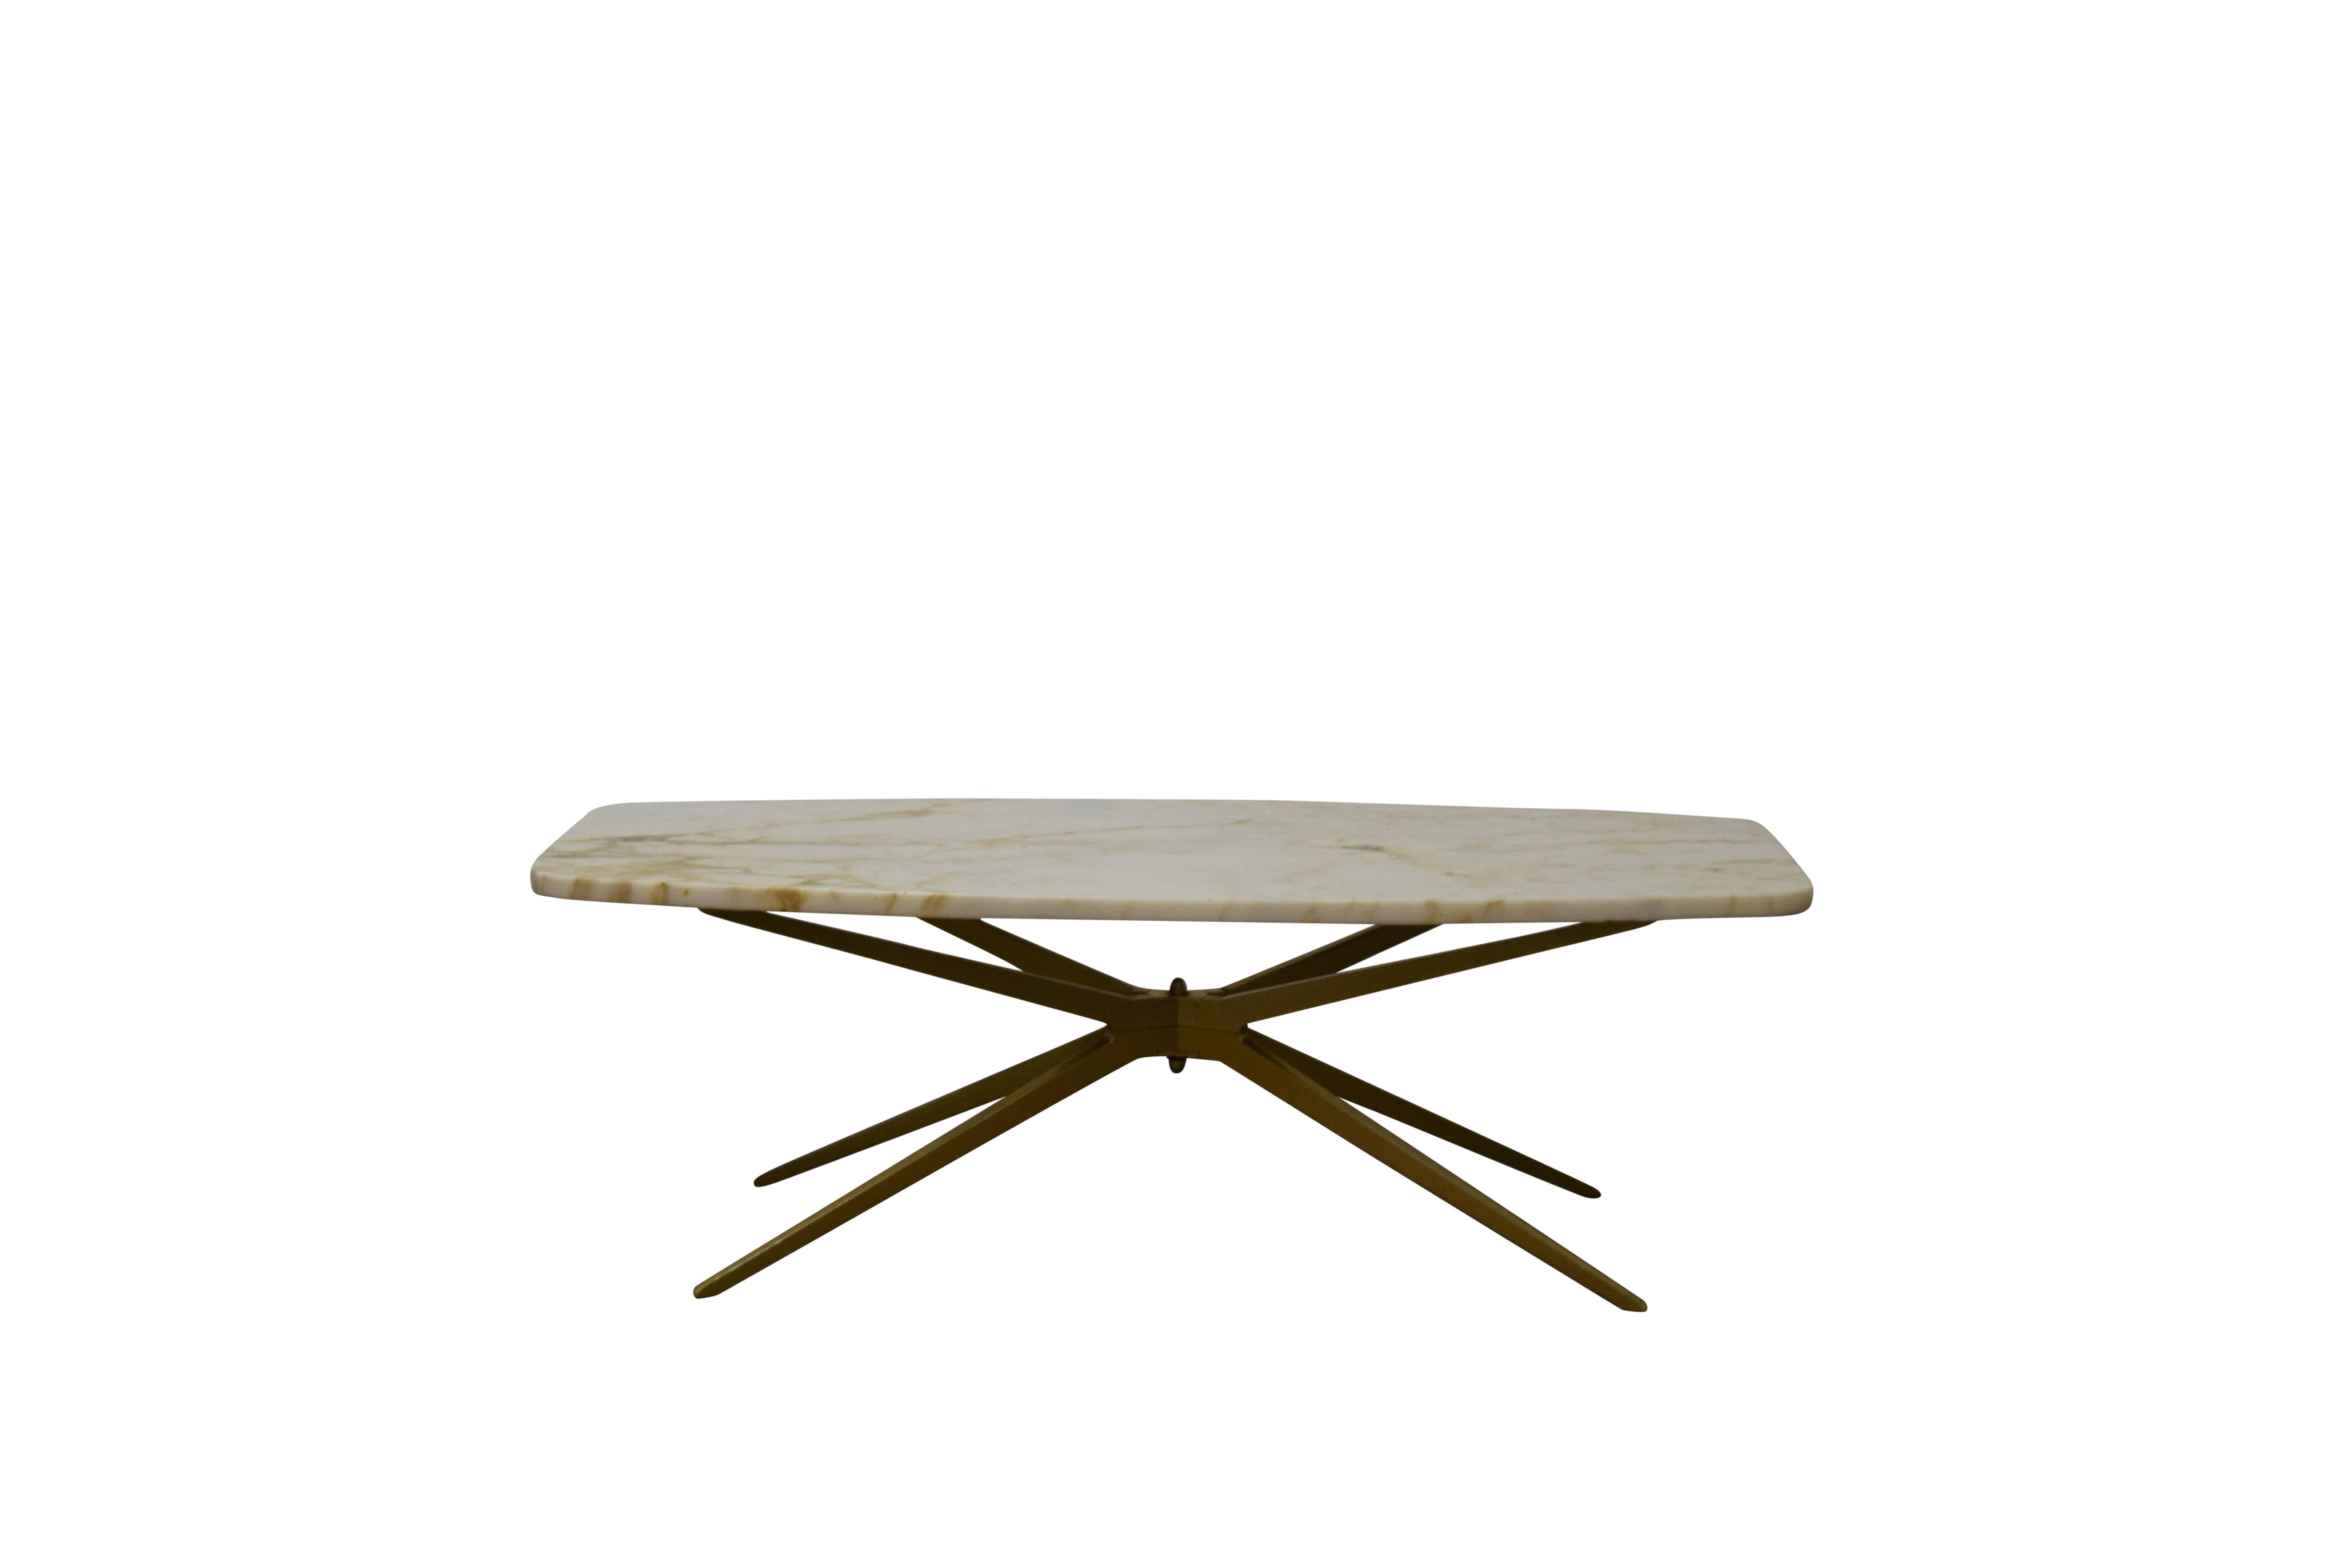 Italian marble-top starburst coffee table. The base is engraved made in Italy. Original marble top.